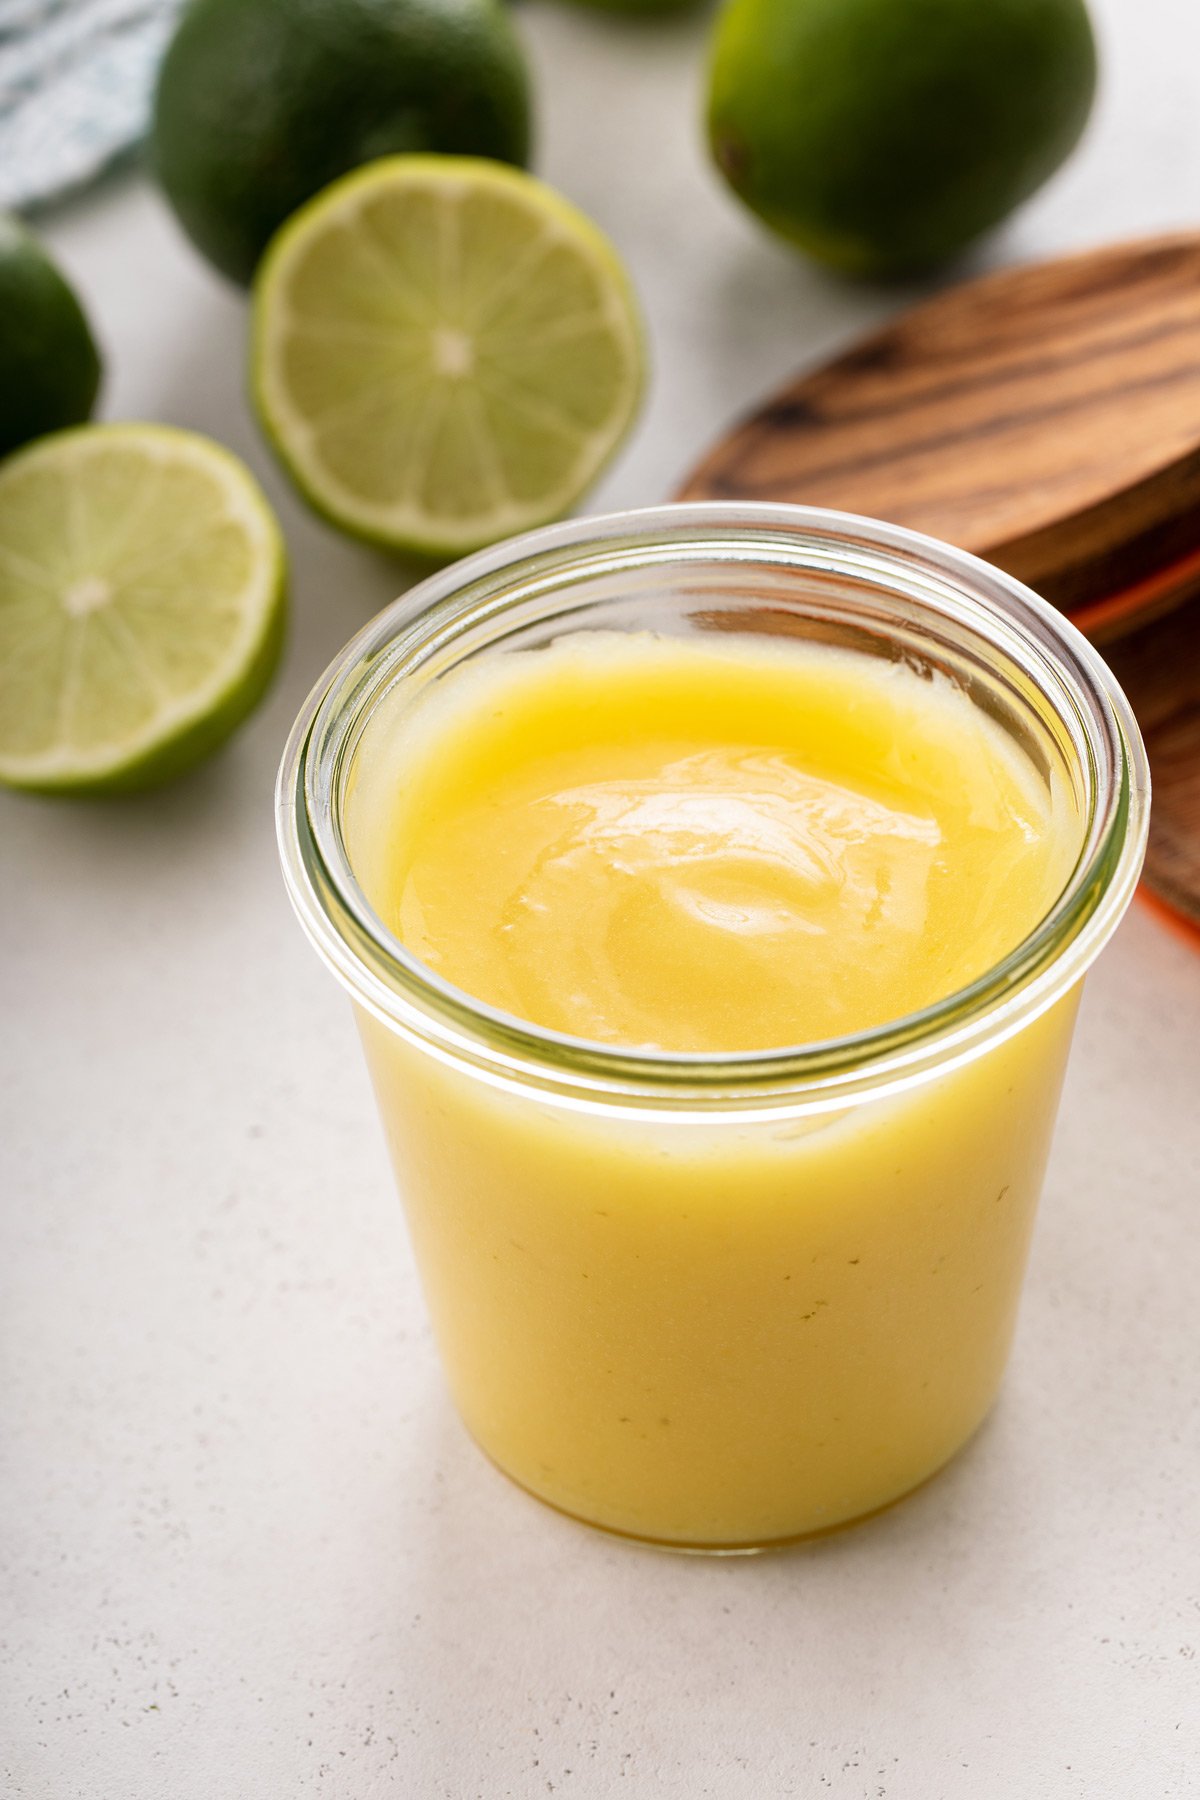 Glass jar filled with lime curd. Fresh limes are visible in the background.